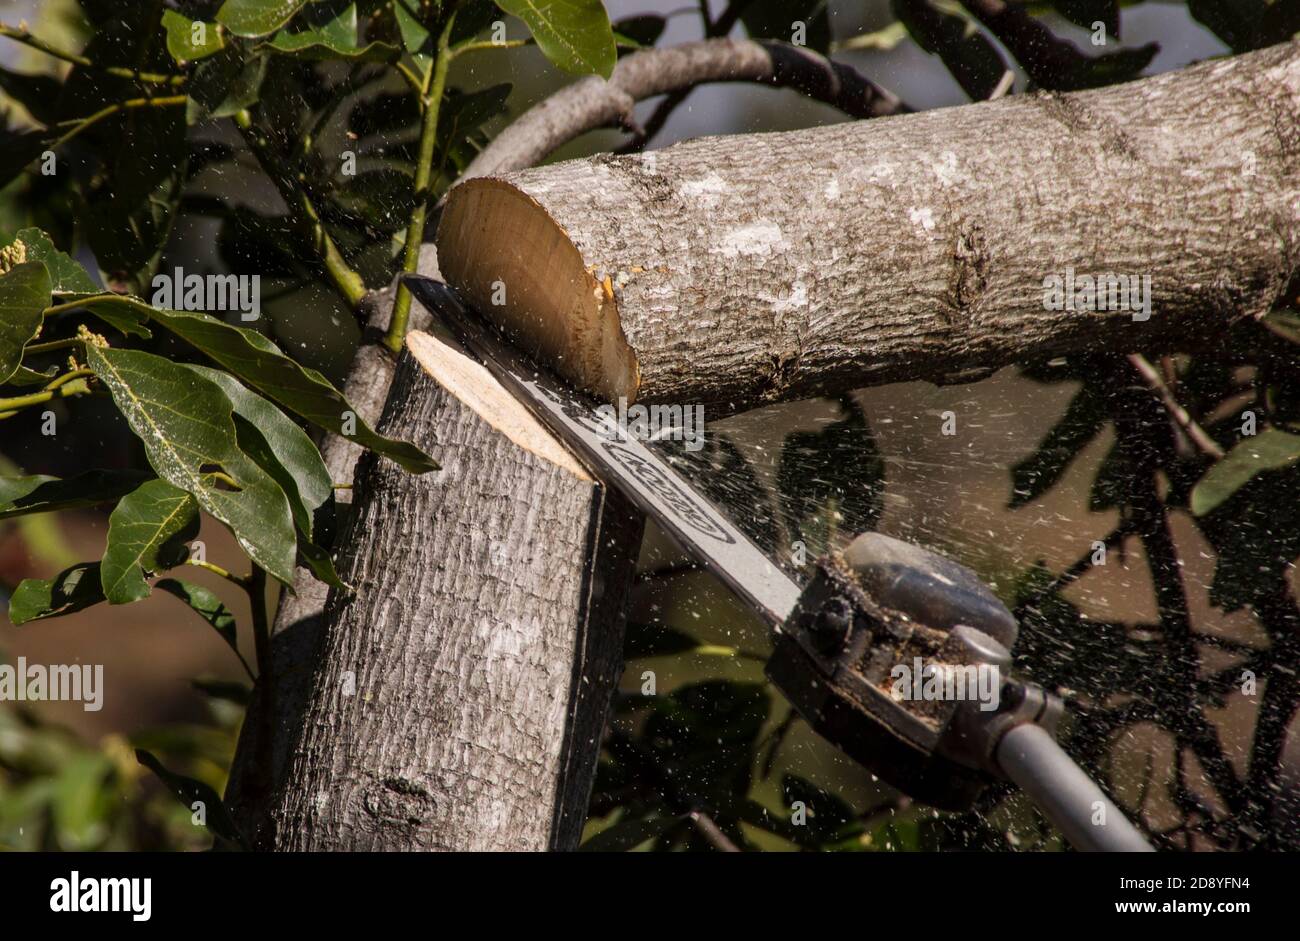 Chainsawing a branch of an avocado tree, pruning maintenance in an orchard onTamborine Mountain, Australia. Stock Photo